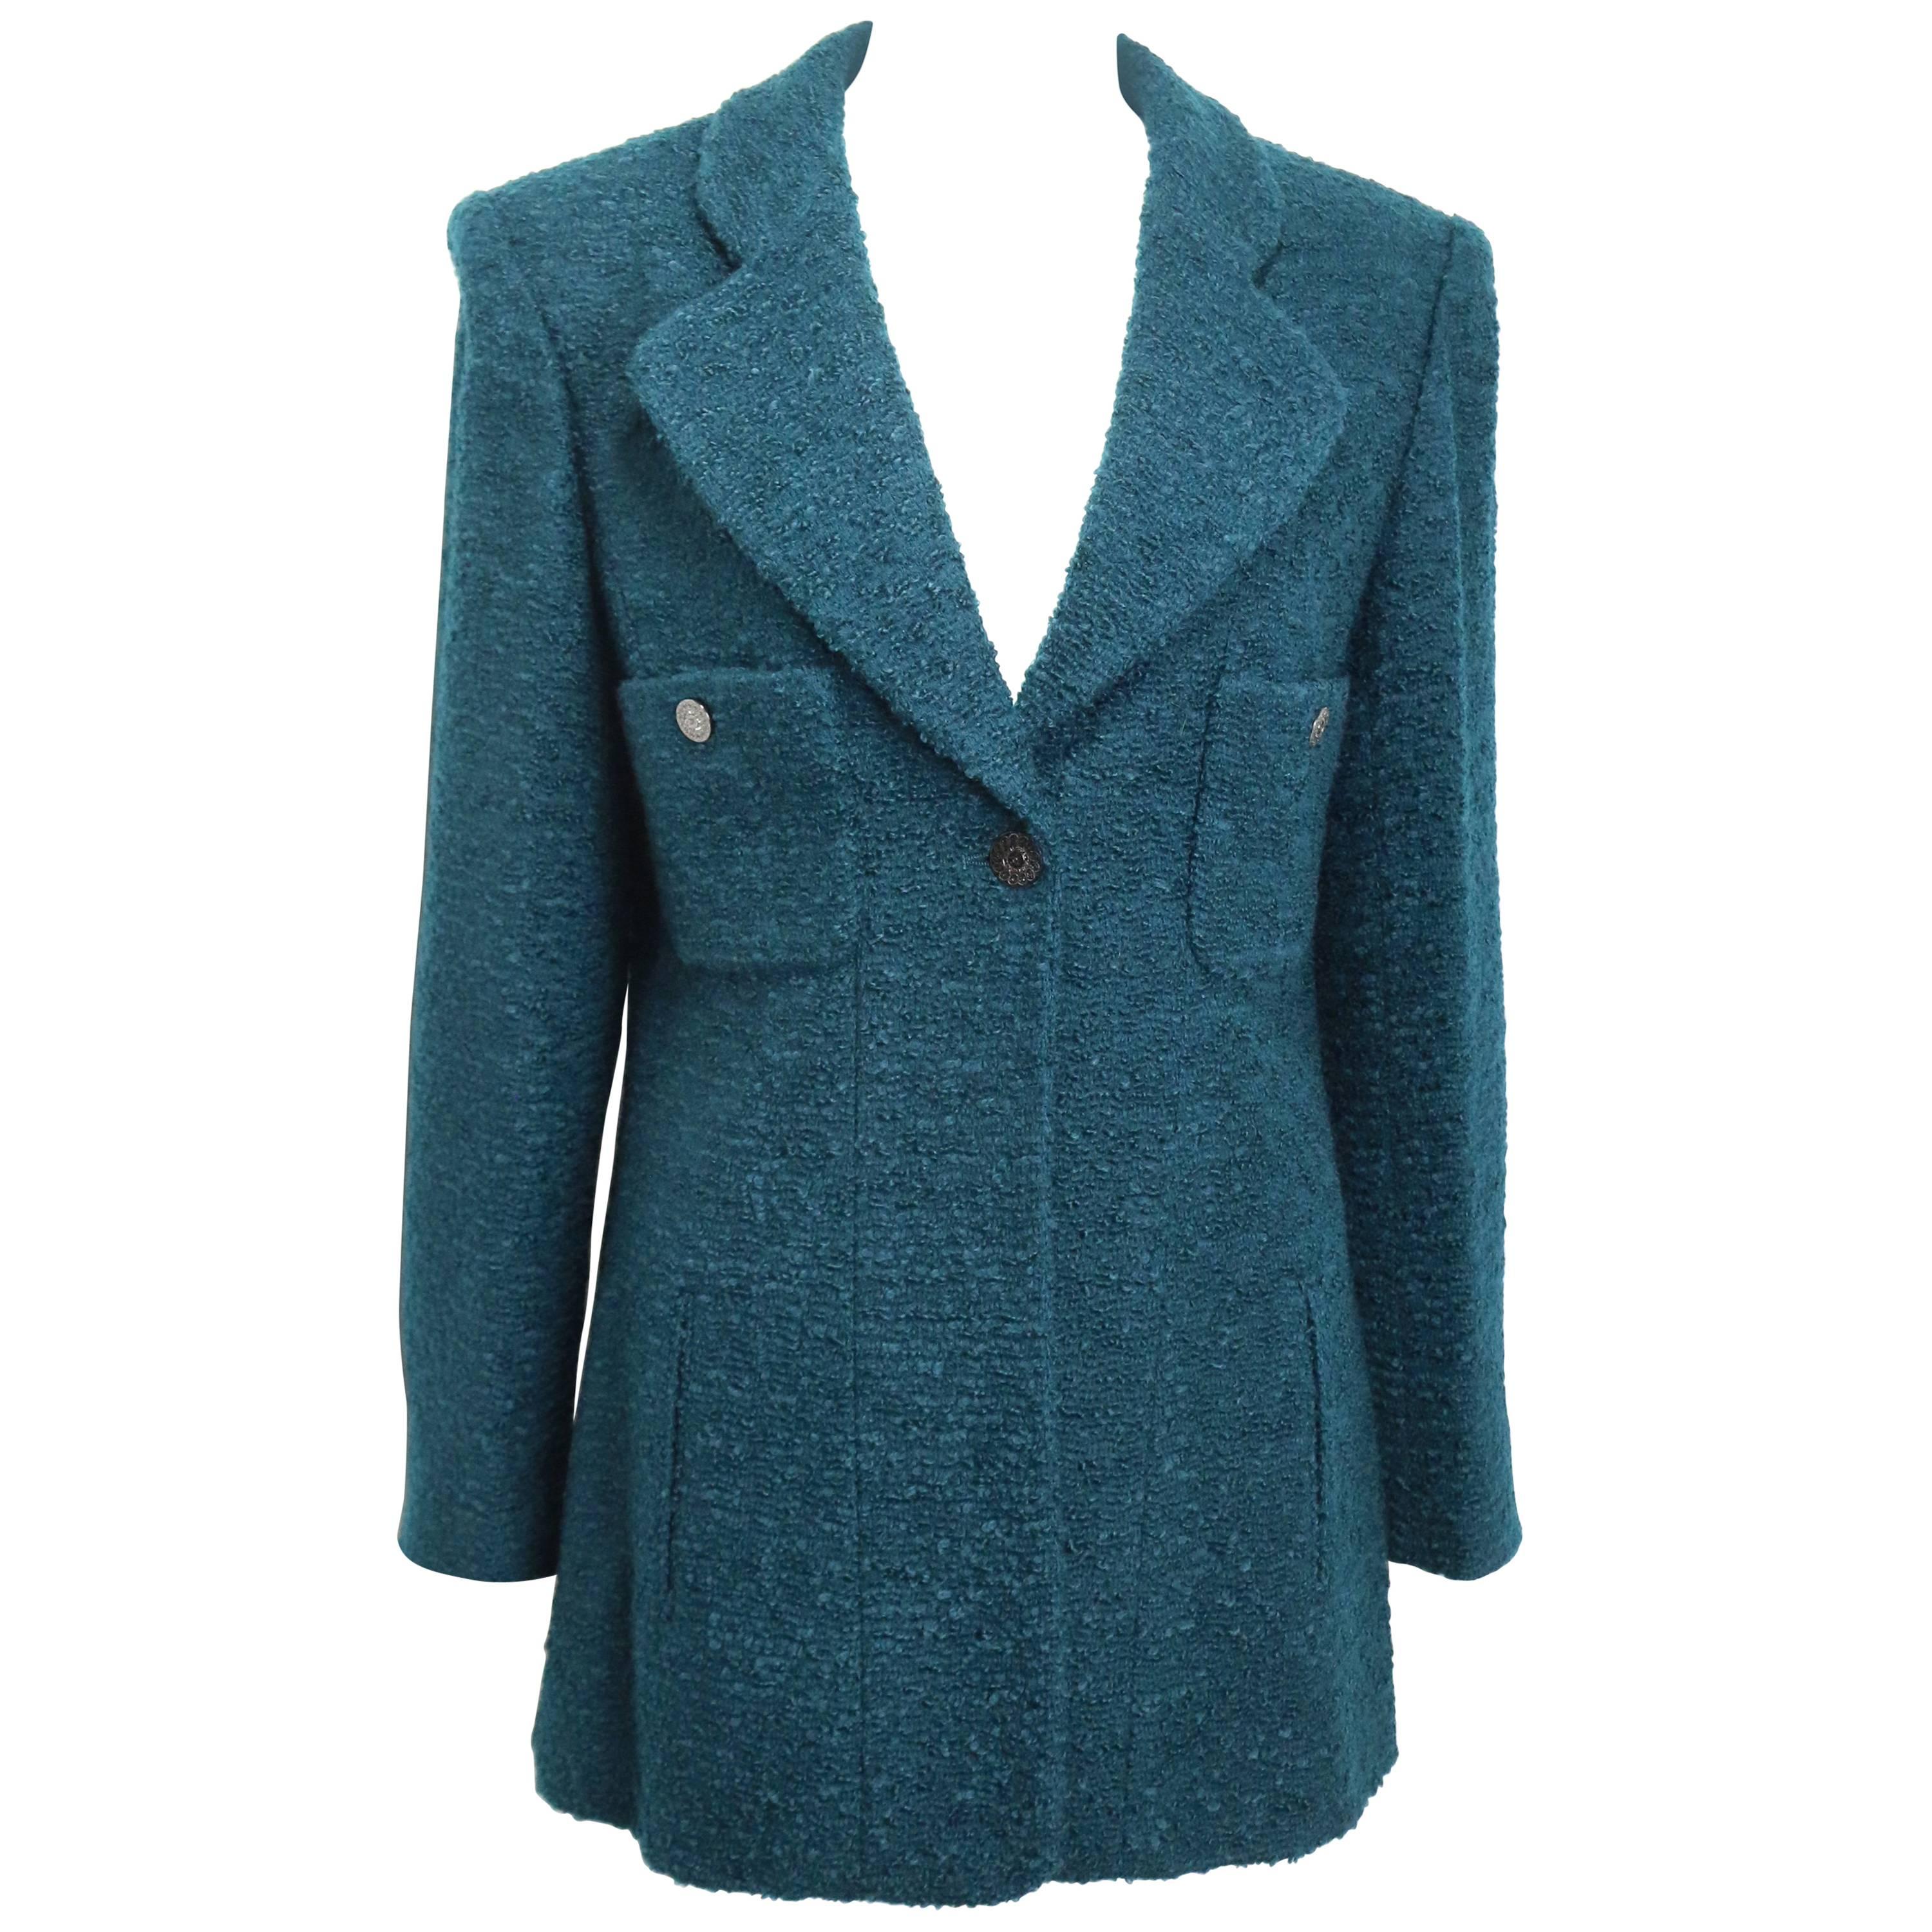 Unworn and Rare 97 Chanel Green Wool and Mohair Tweed Jacket